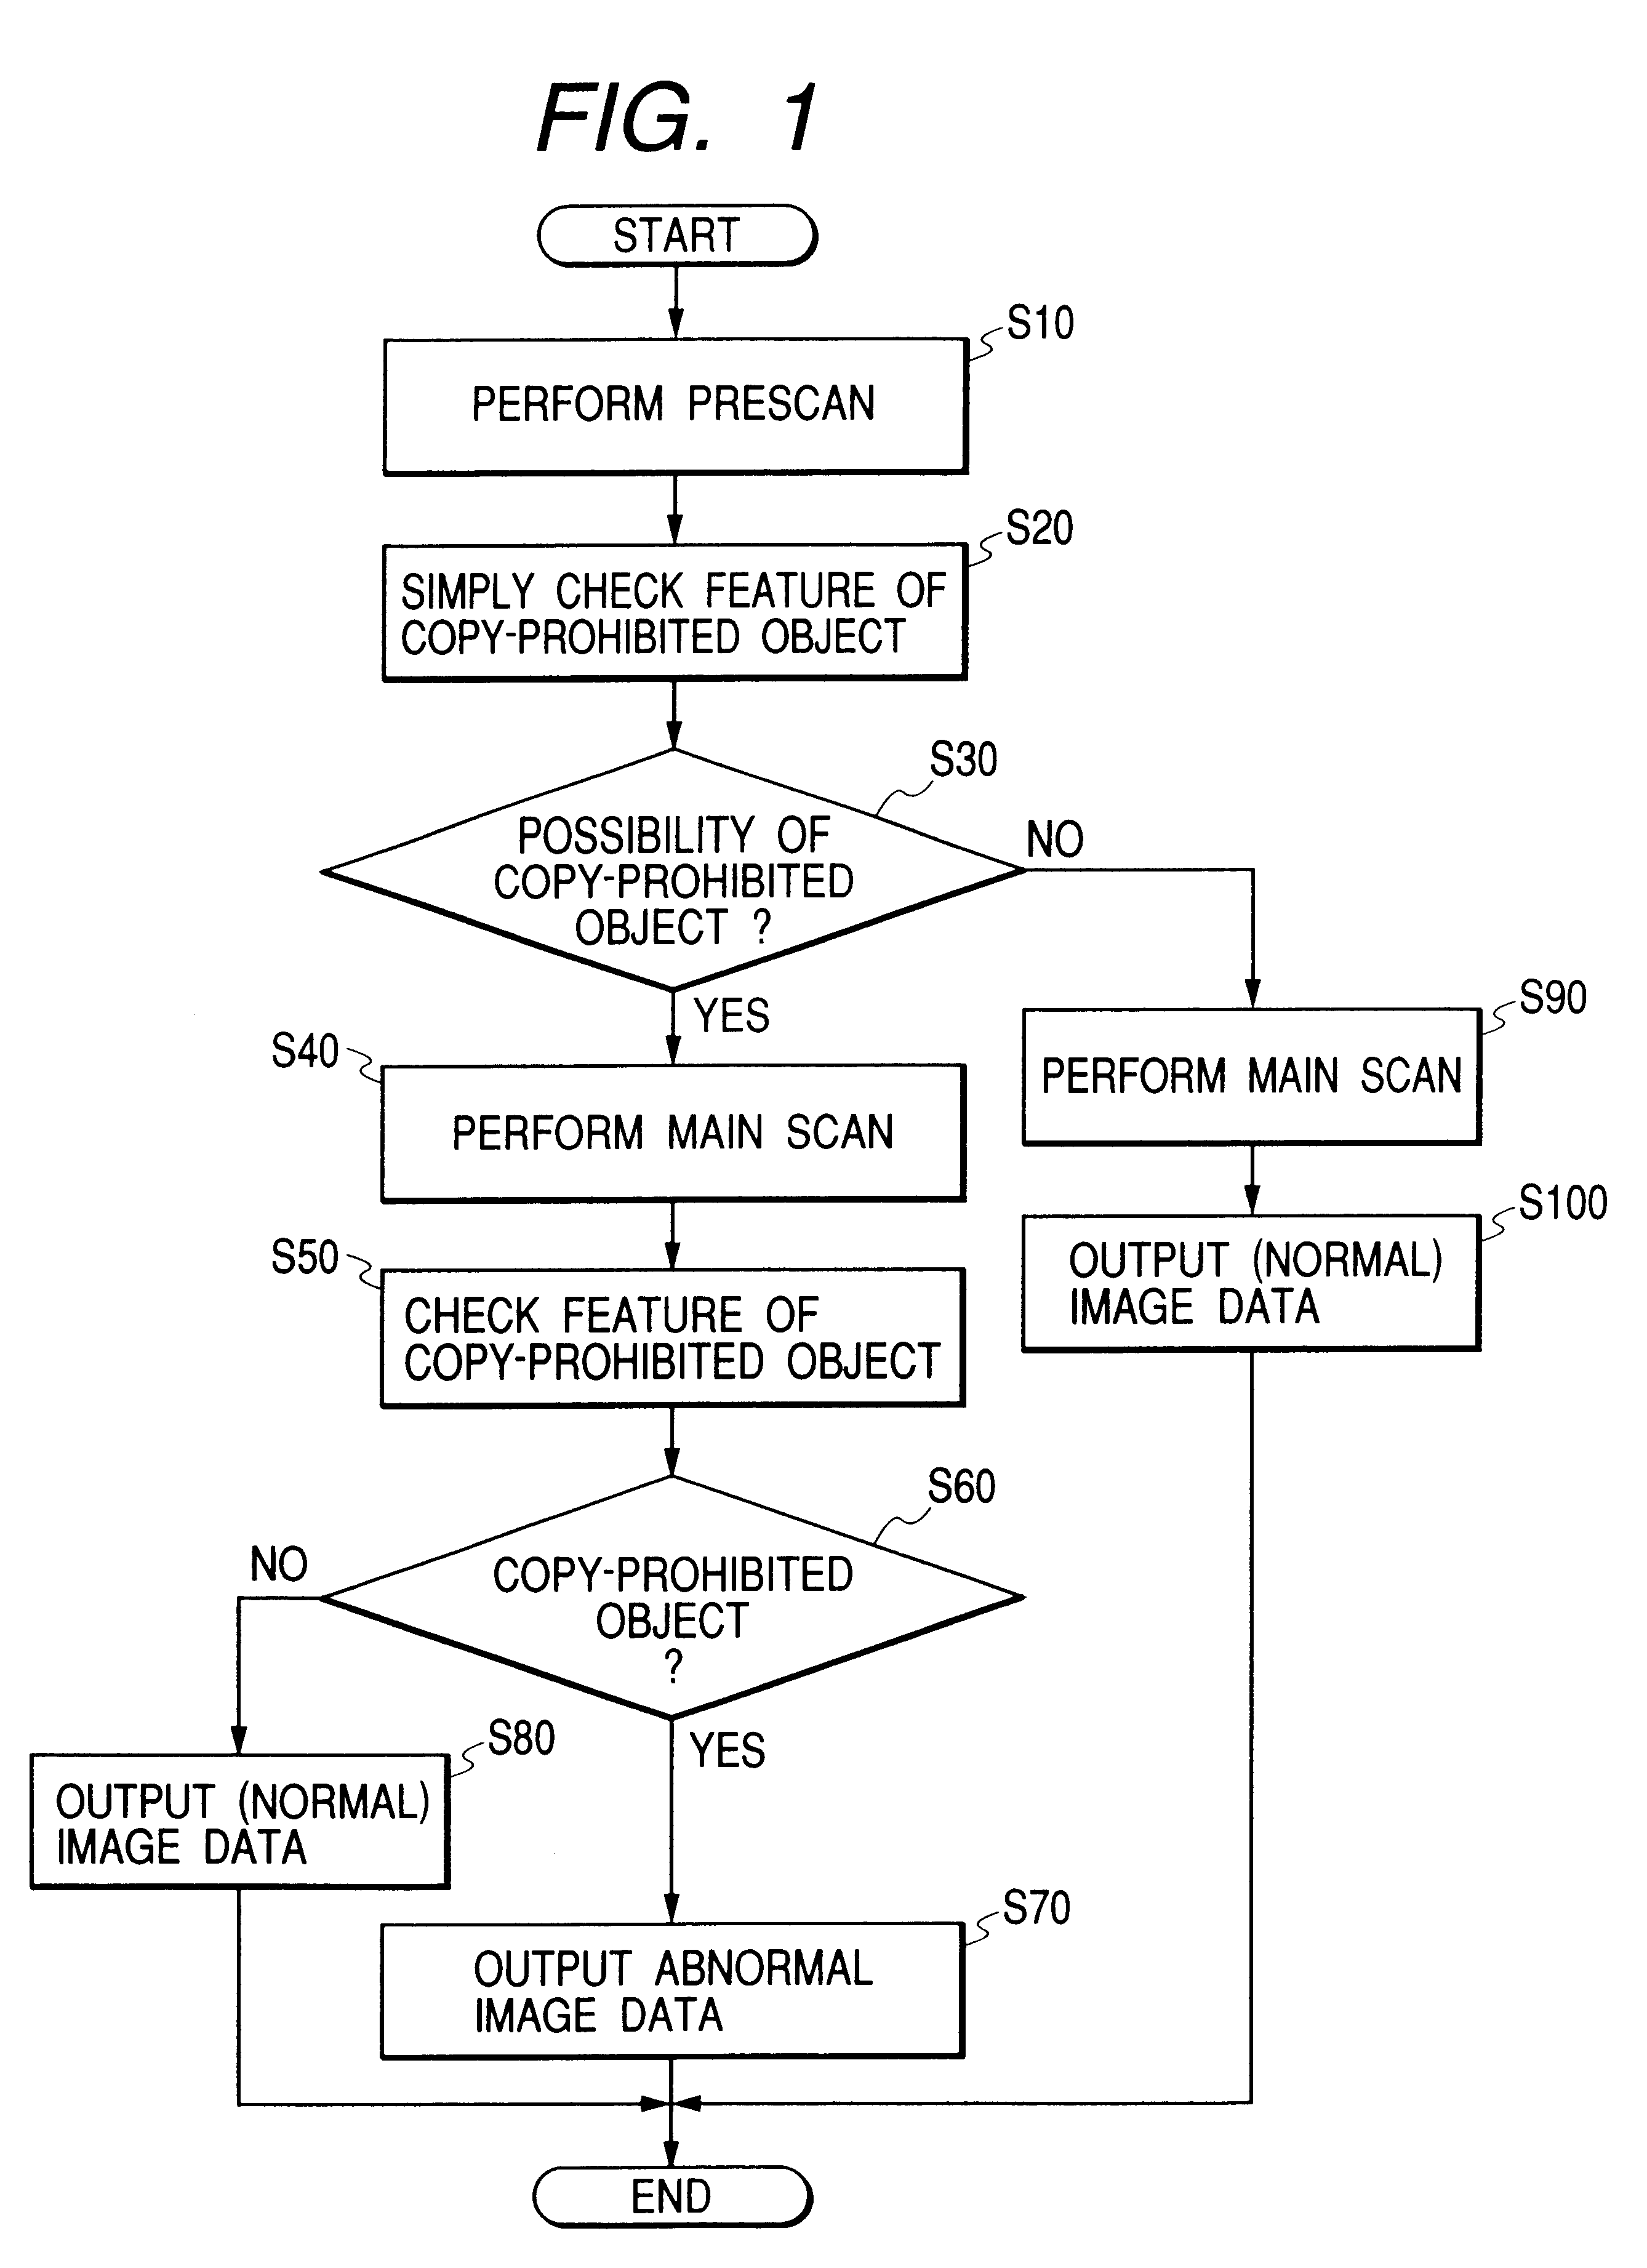 Image processing method, apparatus, and medium storing program for checking for copy-prohibited objects